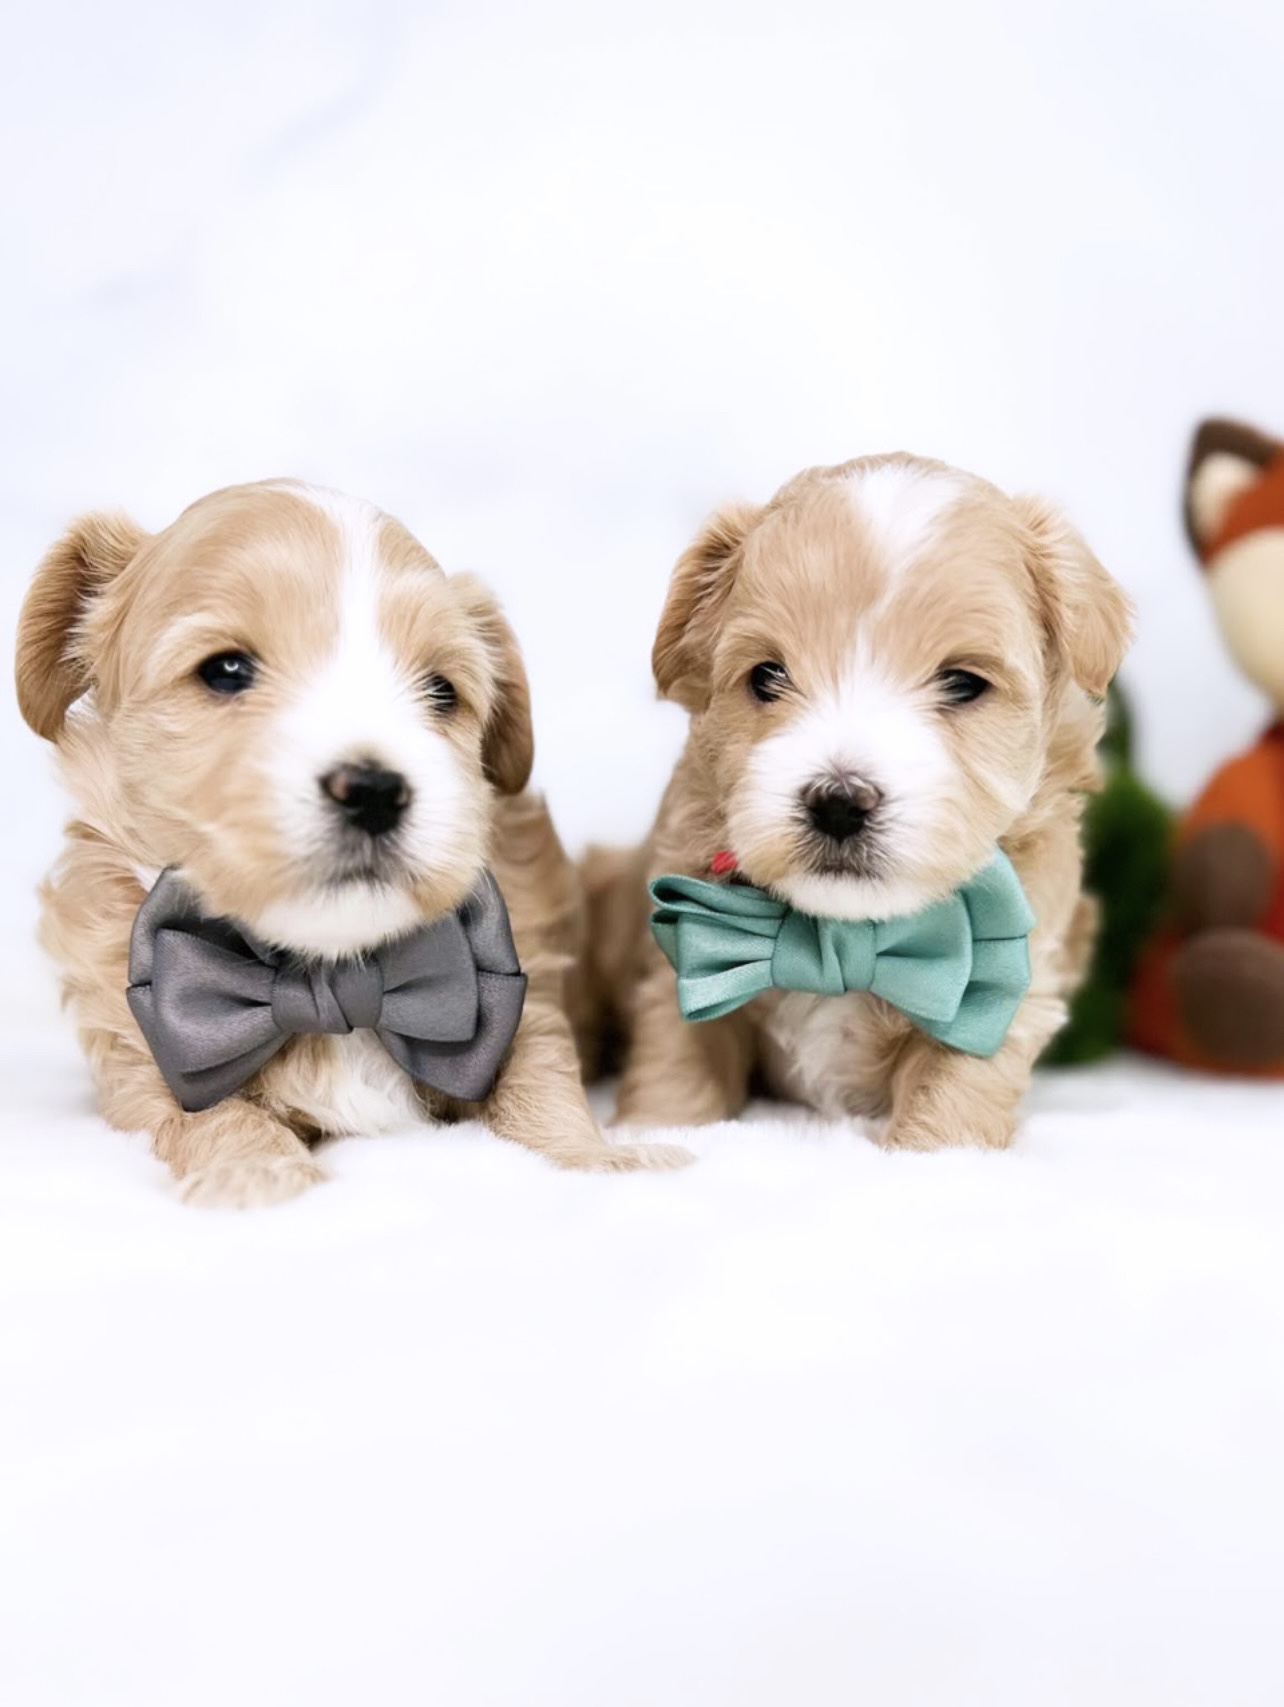 A pair of petite dogs, adorned with stylish bow ties, photographed against a clean white background.